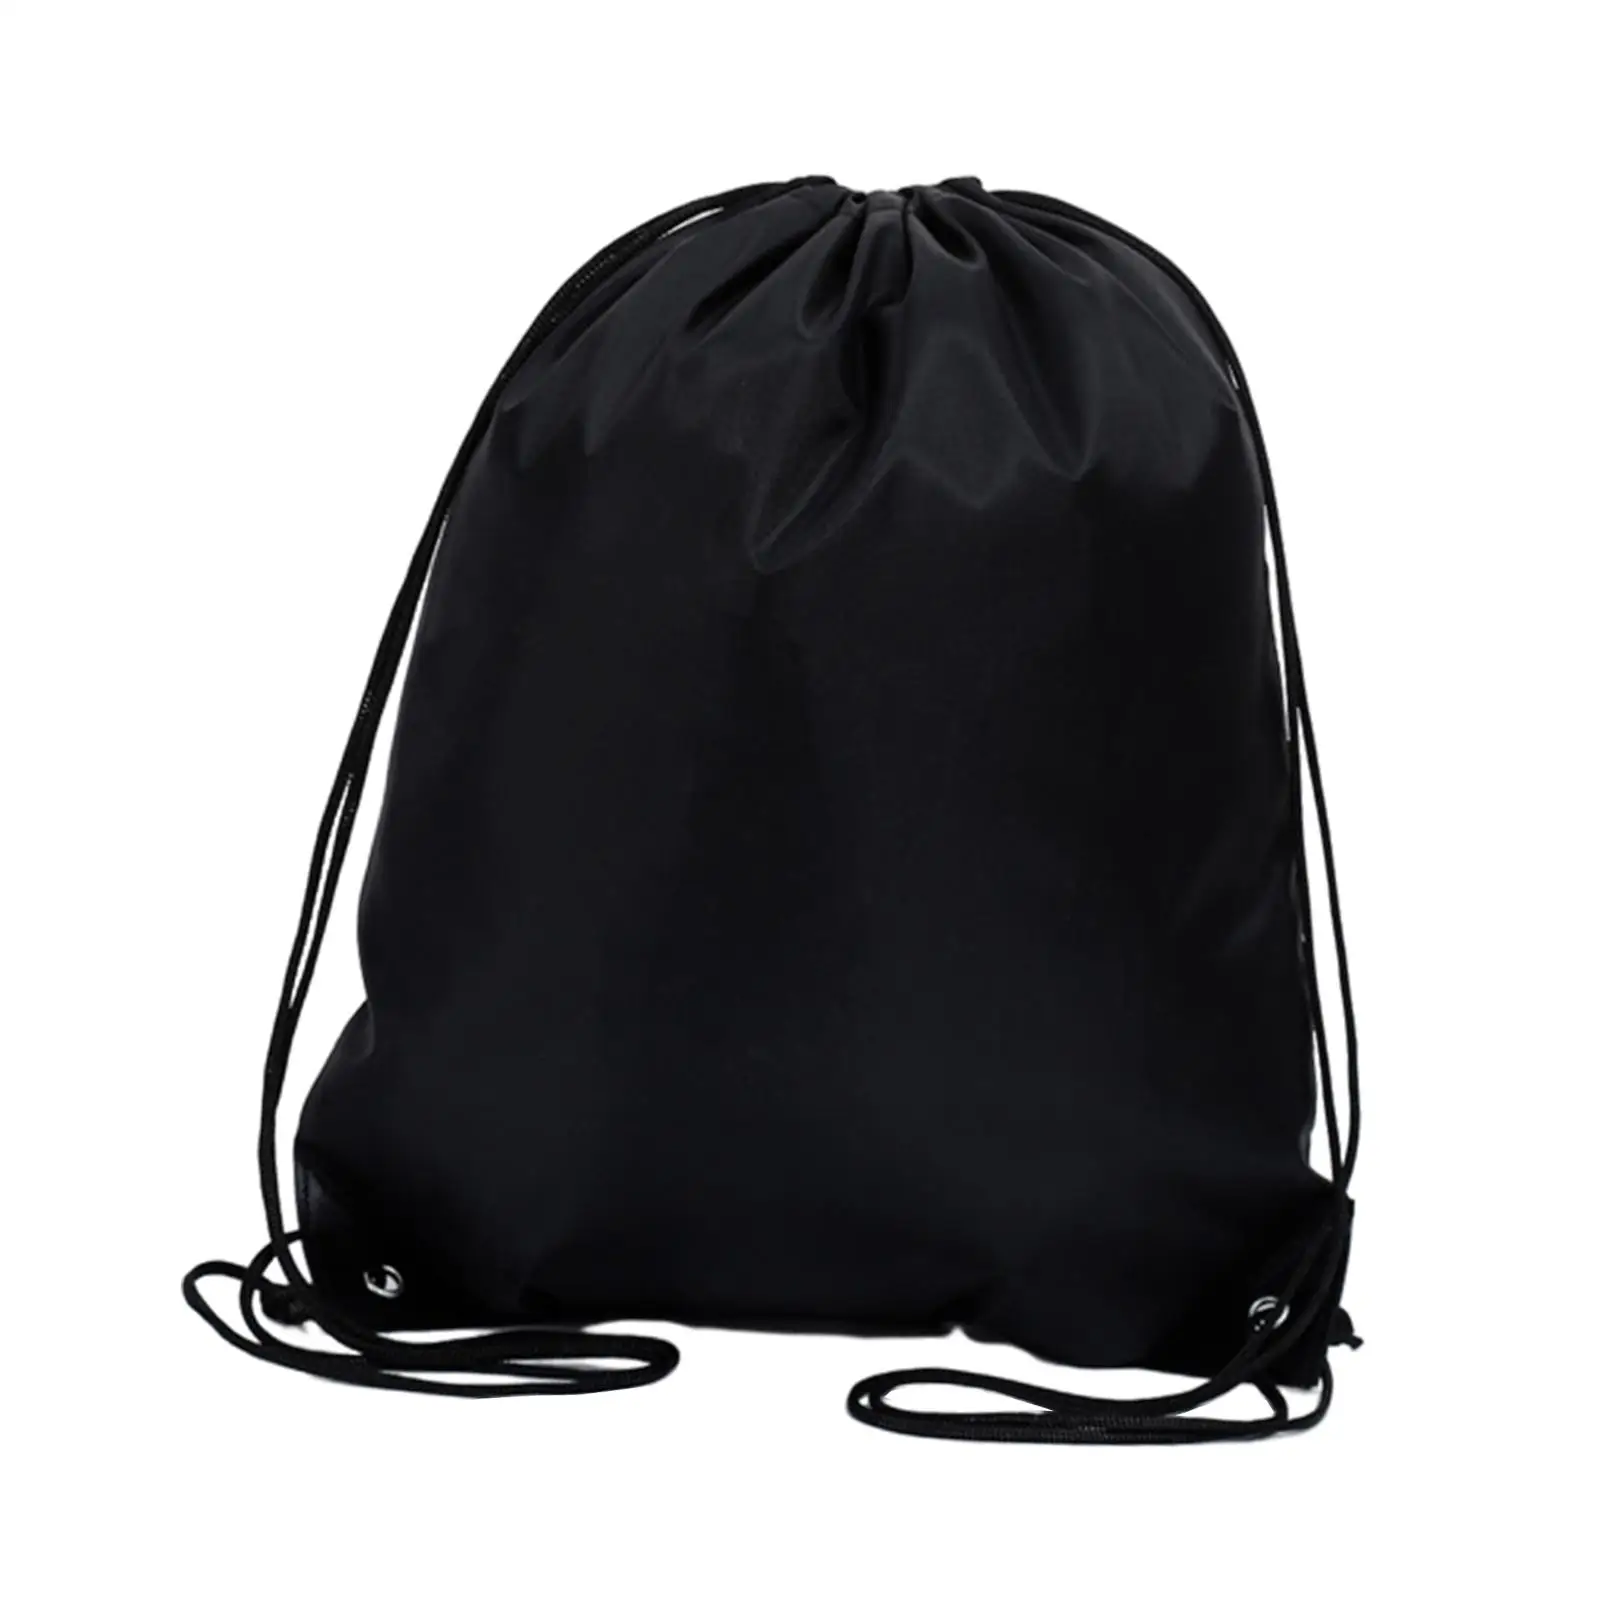 Draw String Bag PE Bags Gym Bag Casual Day Pack Balls Holder Cinch Sack Drawstring Backpack for Adults Men Women Backpacking